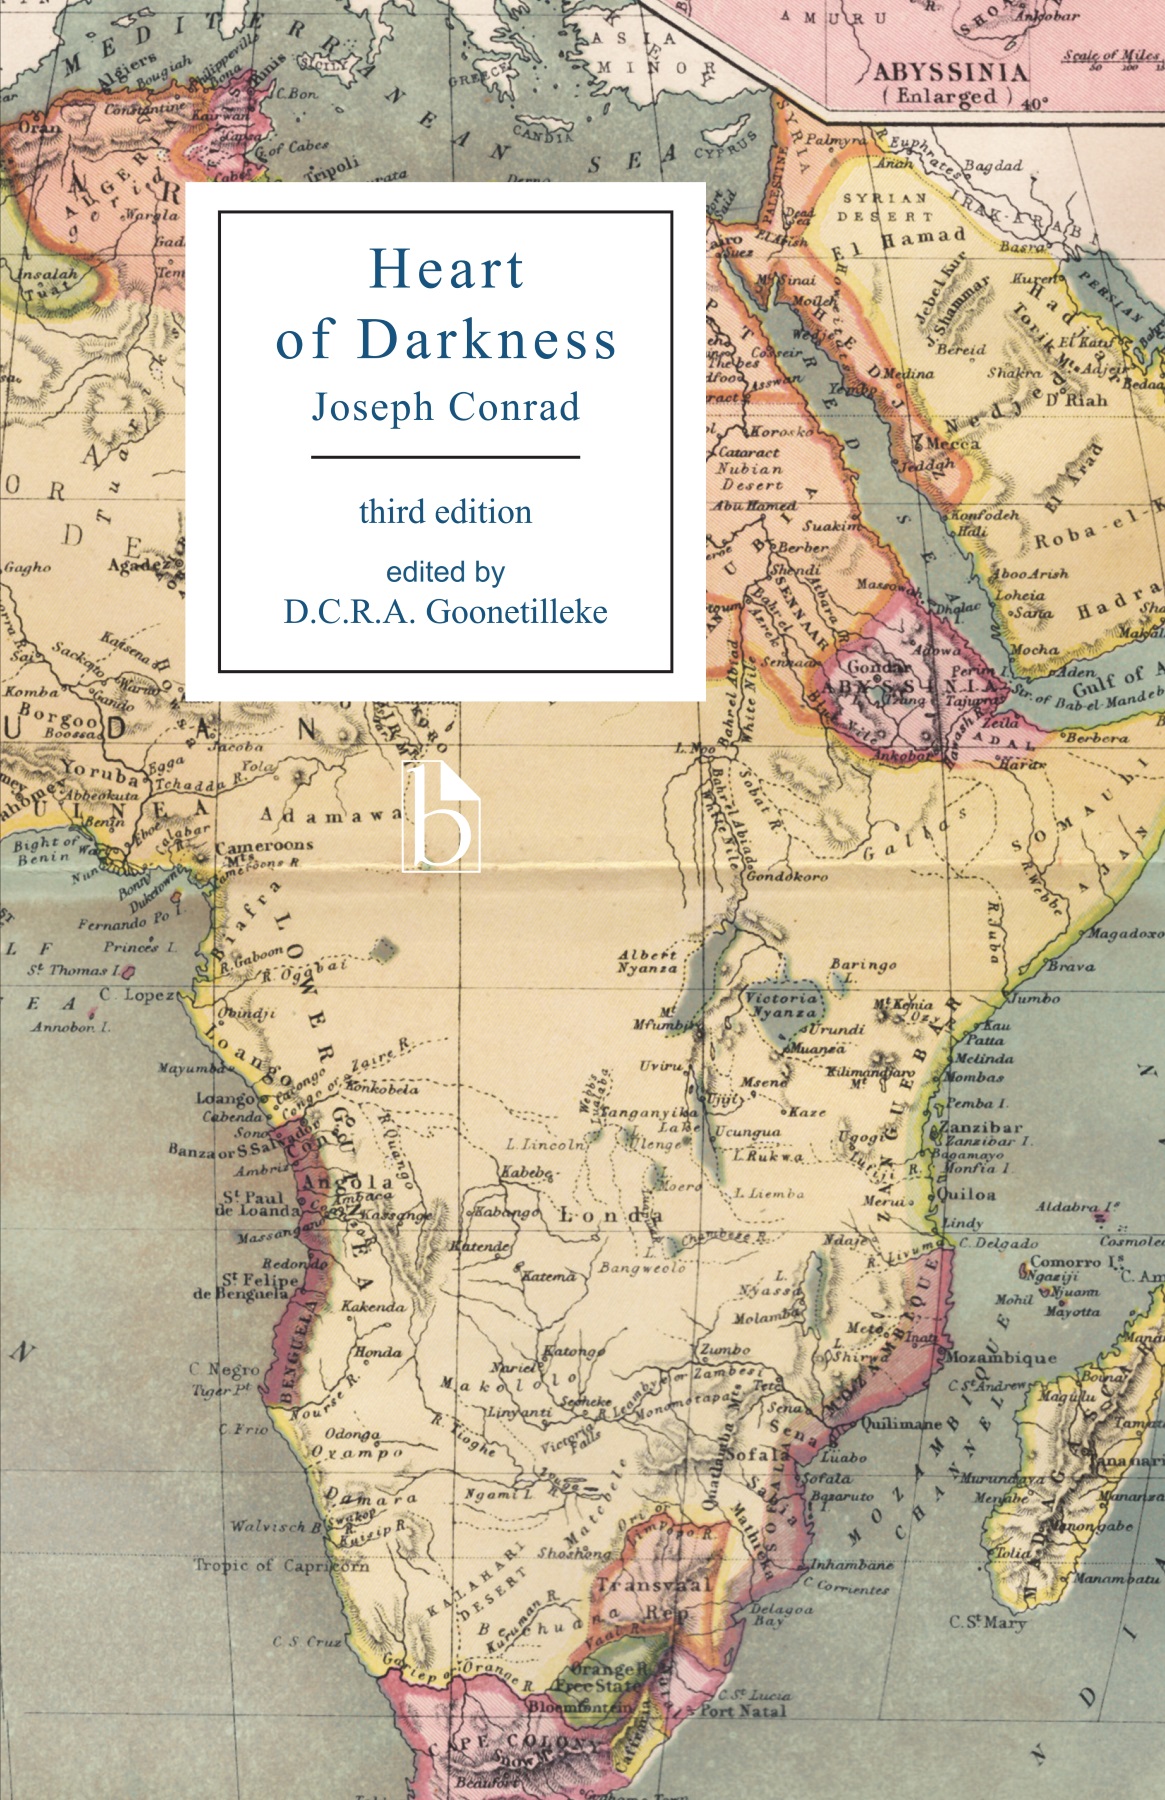 Heart of Darkness Ed. Third Edition Broadview Press